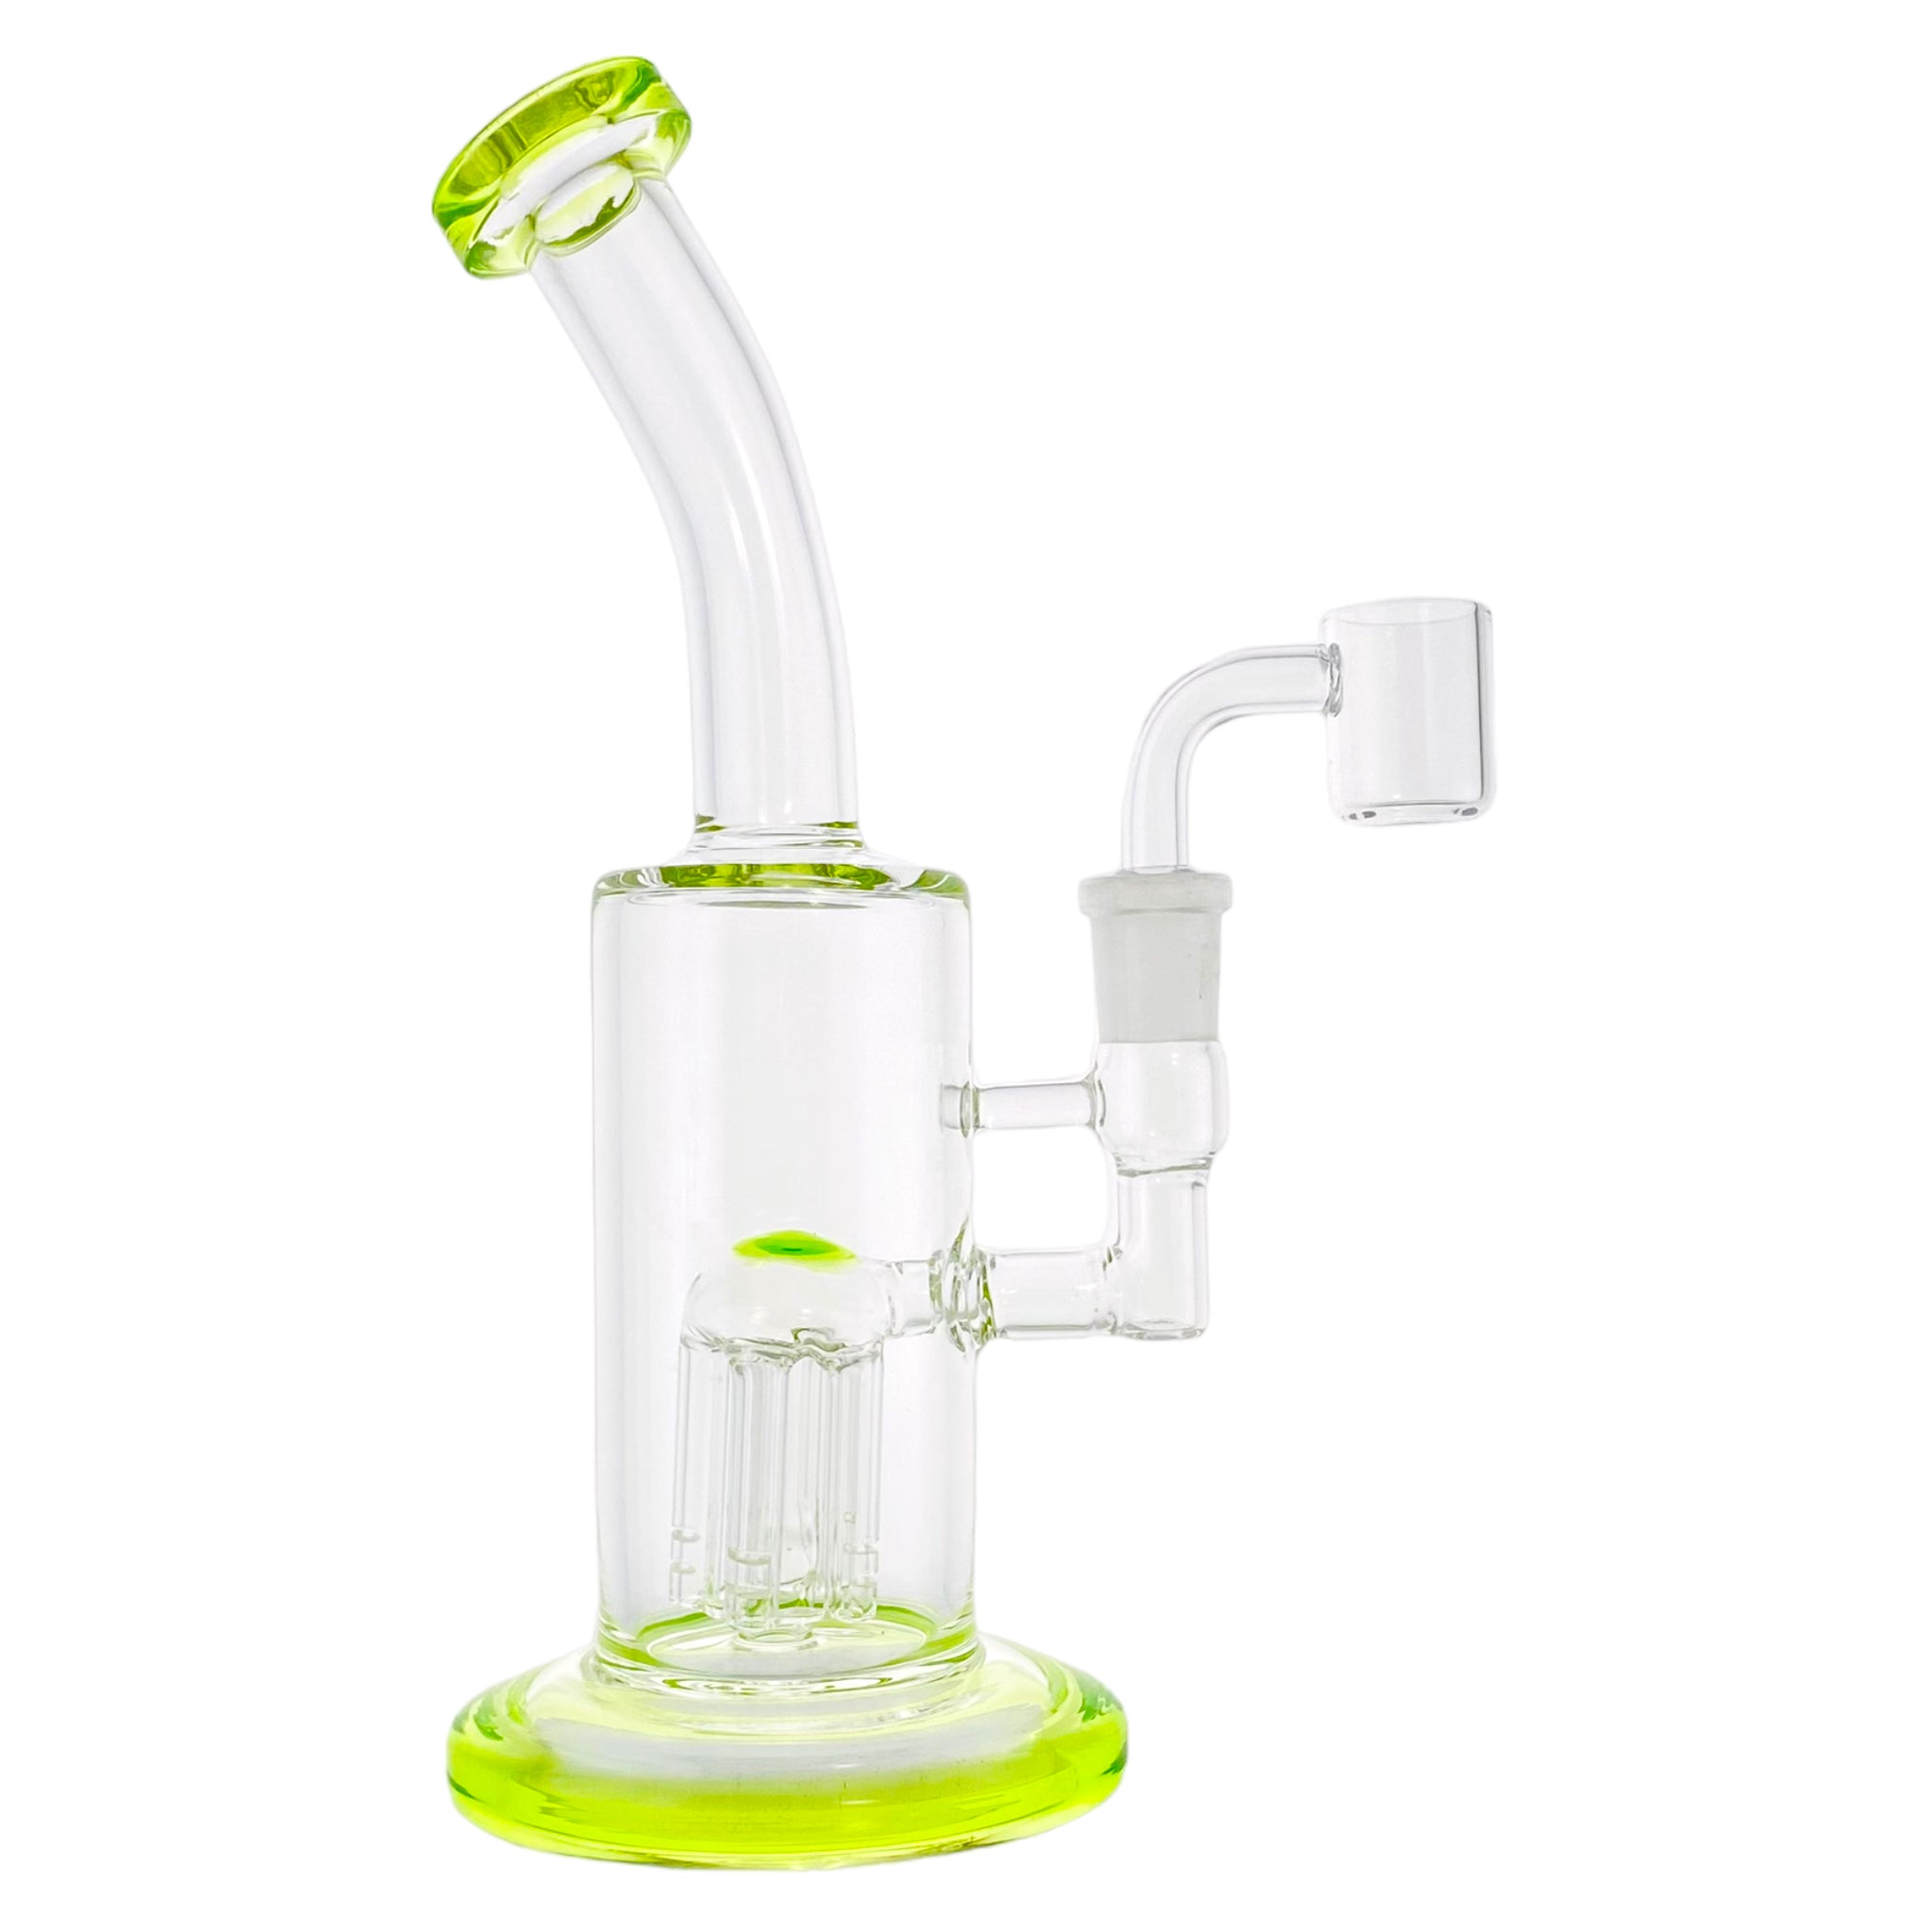 Green Banger Hanger Dab Rig With Tree Perc